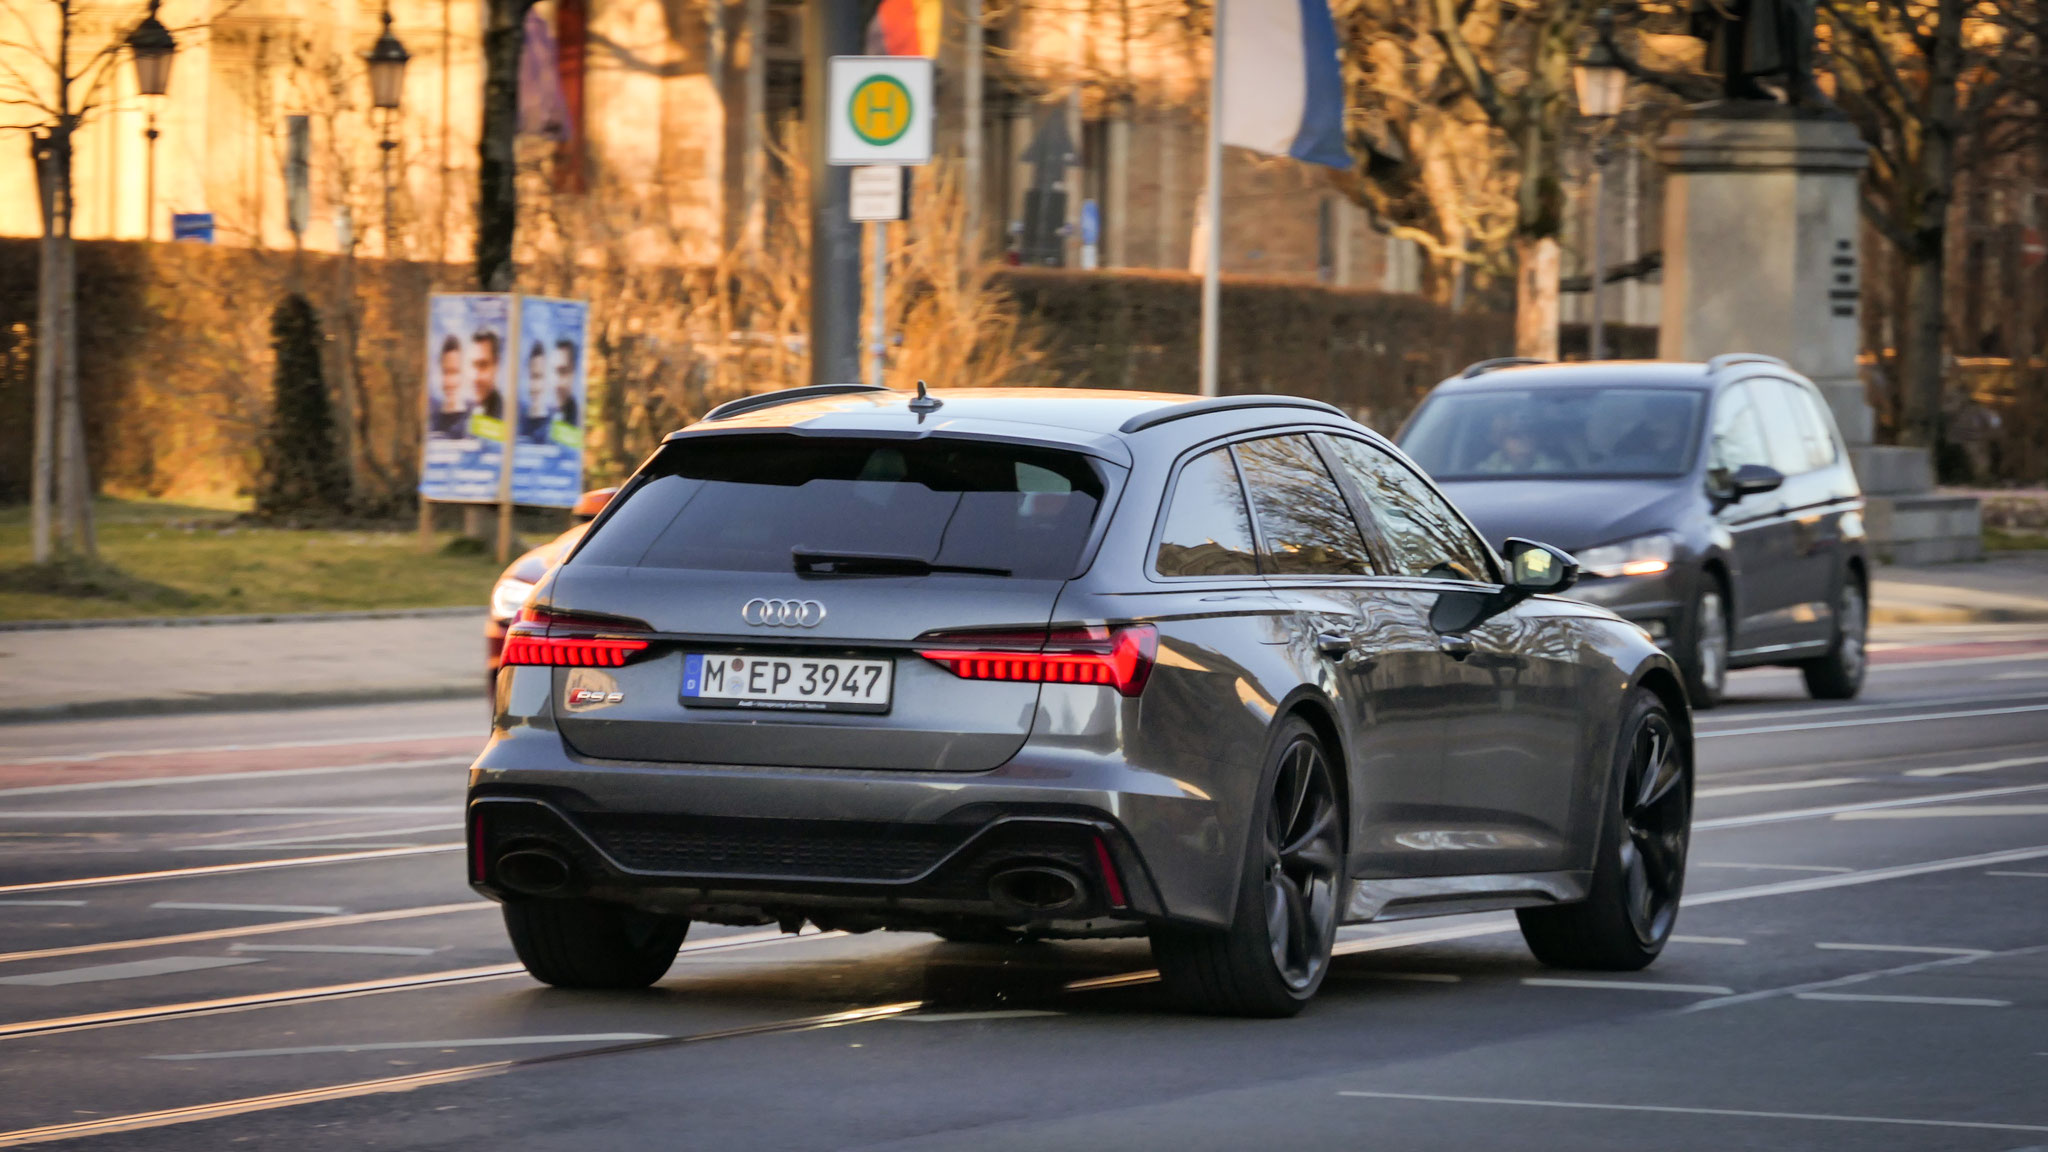 Audi RS6 - M-EP-3947